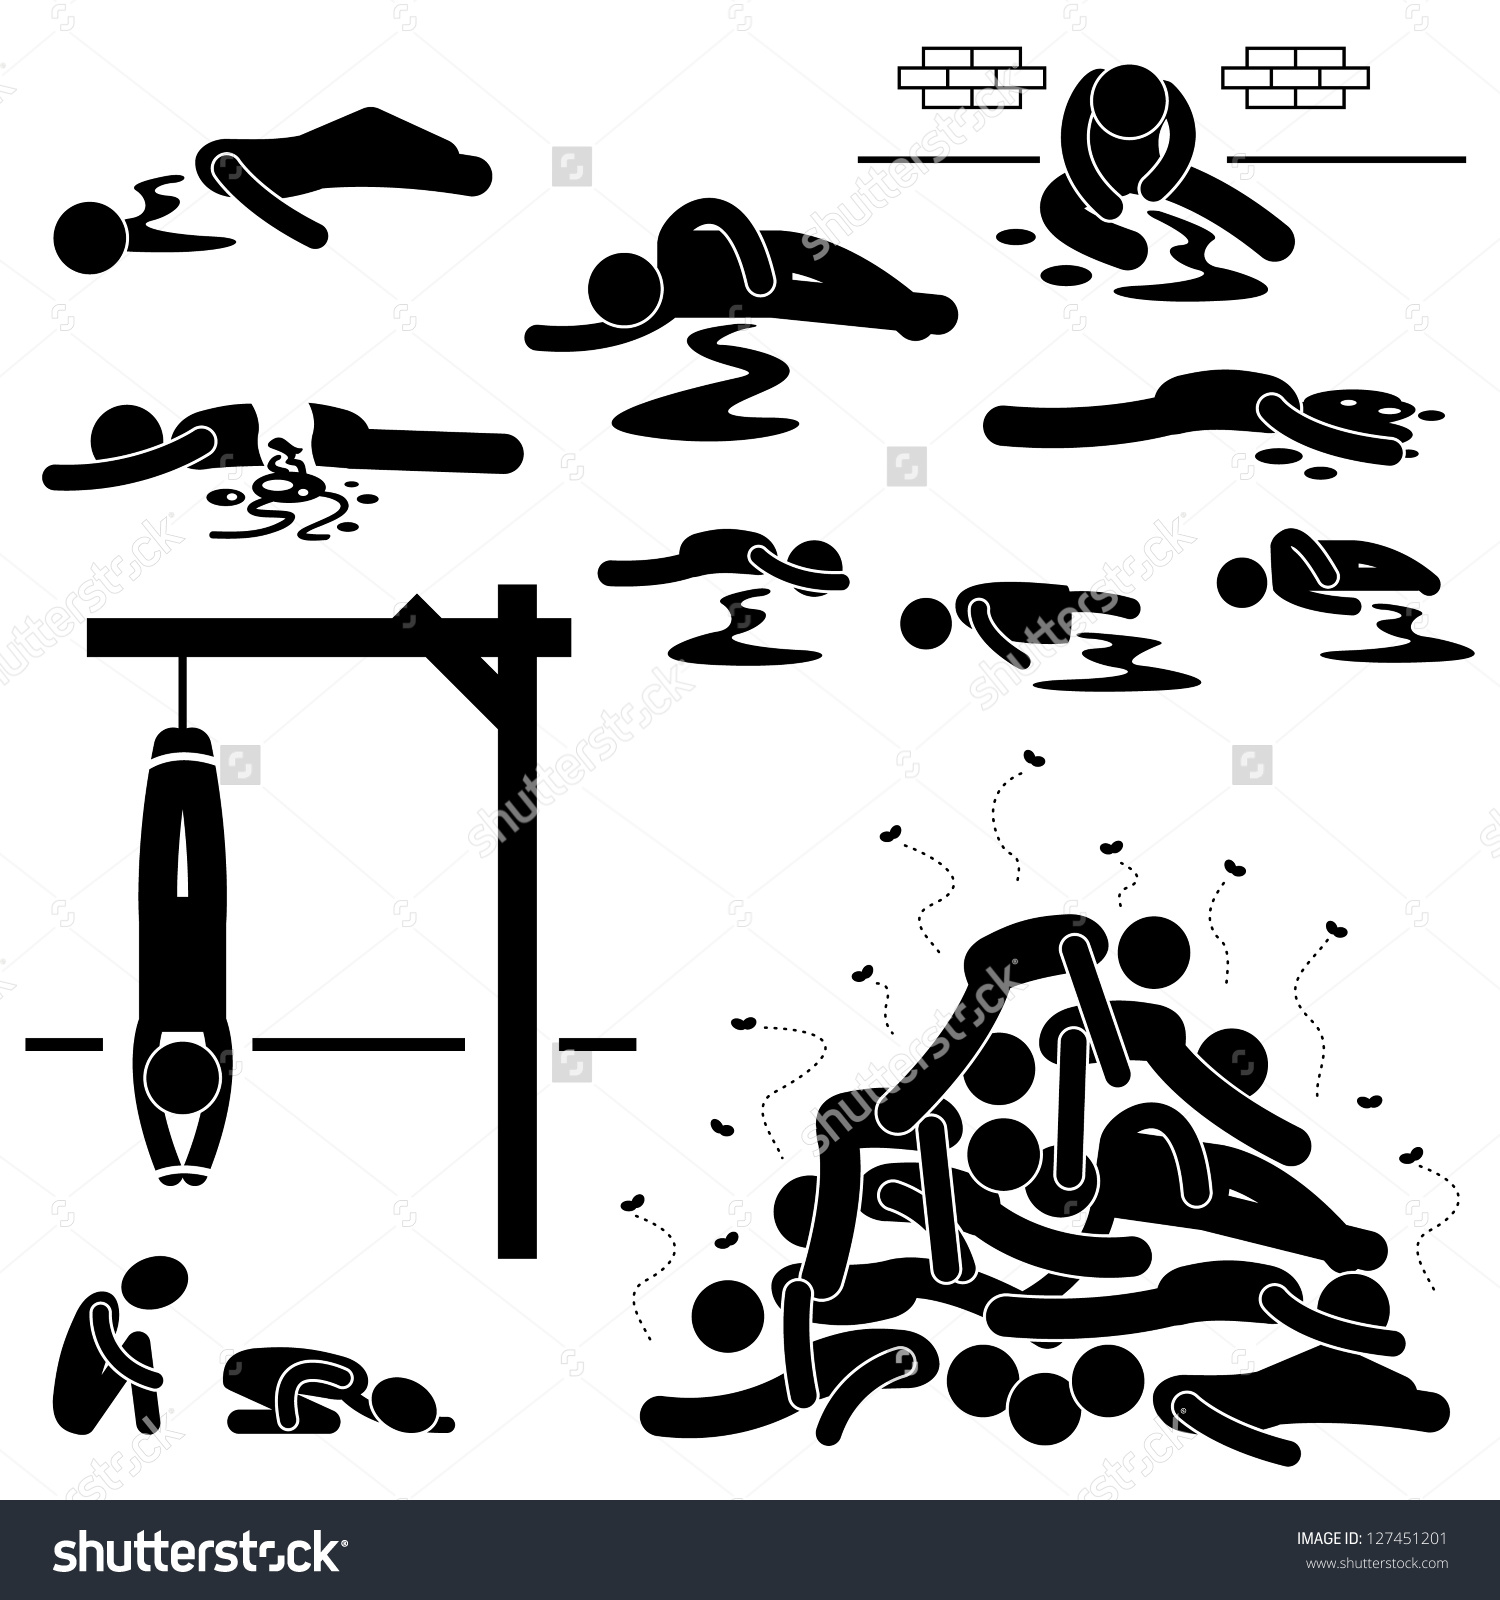 Died people clipart.